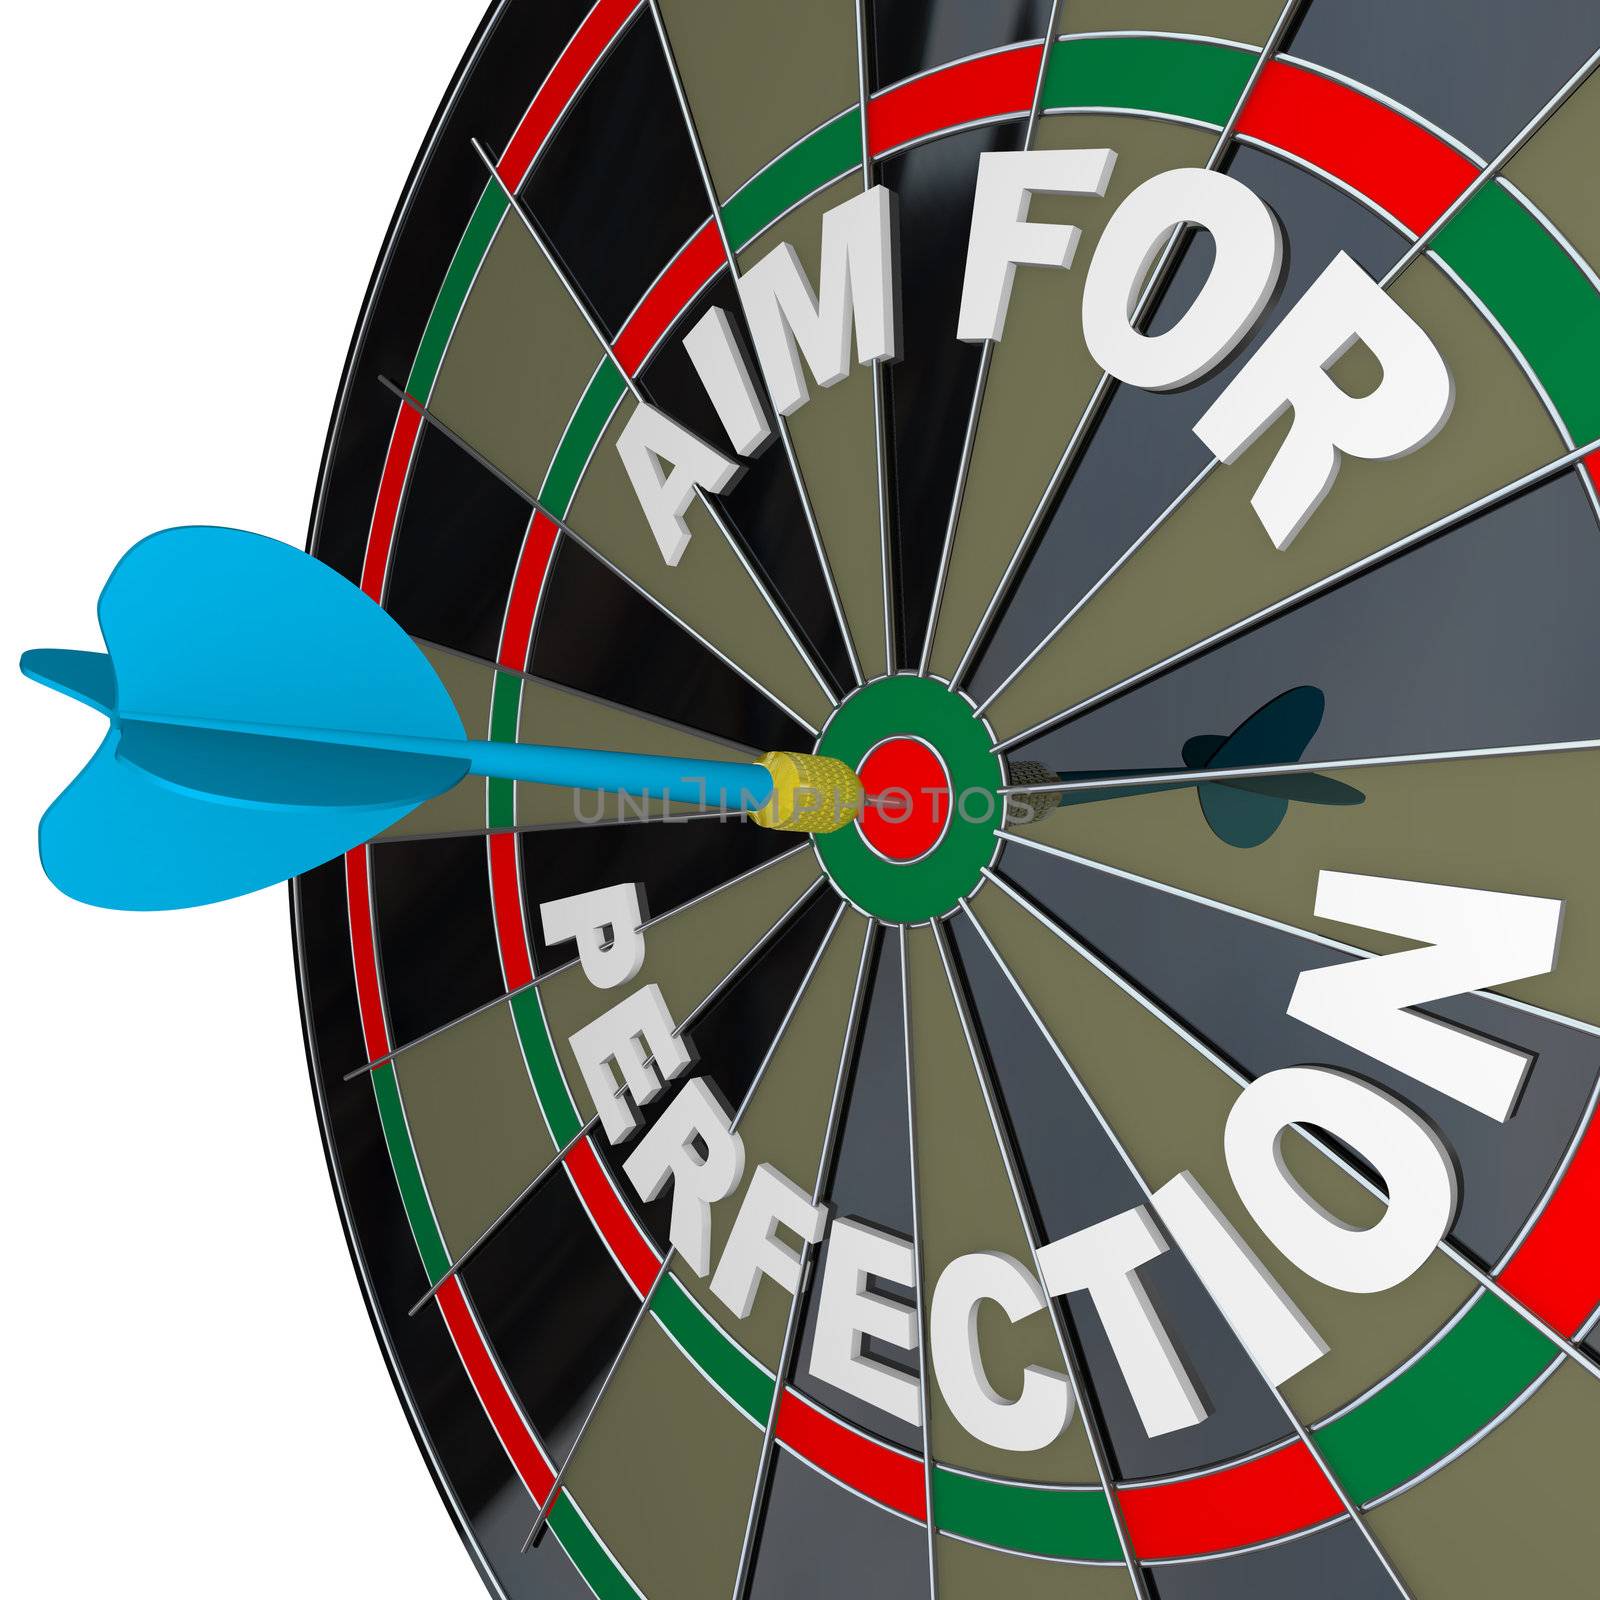 Aim for Perfection - Dart Hits Target Bulls-Eye on Dartboard by iQoncept